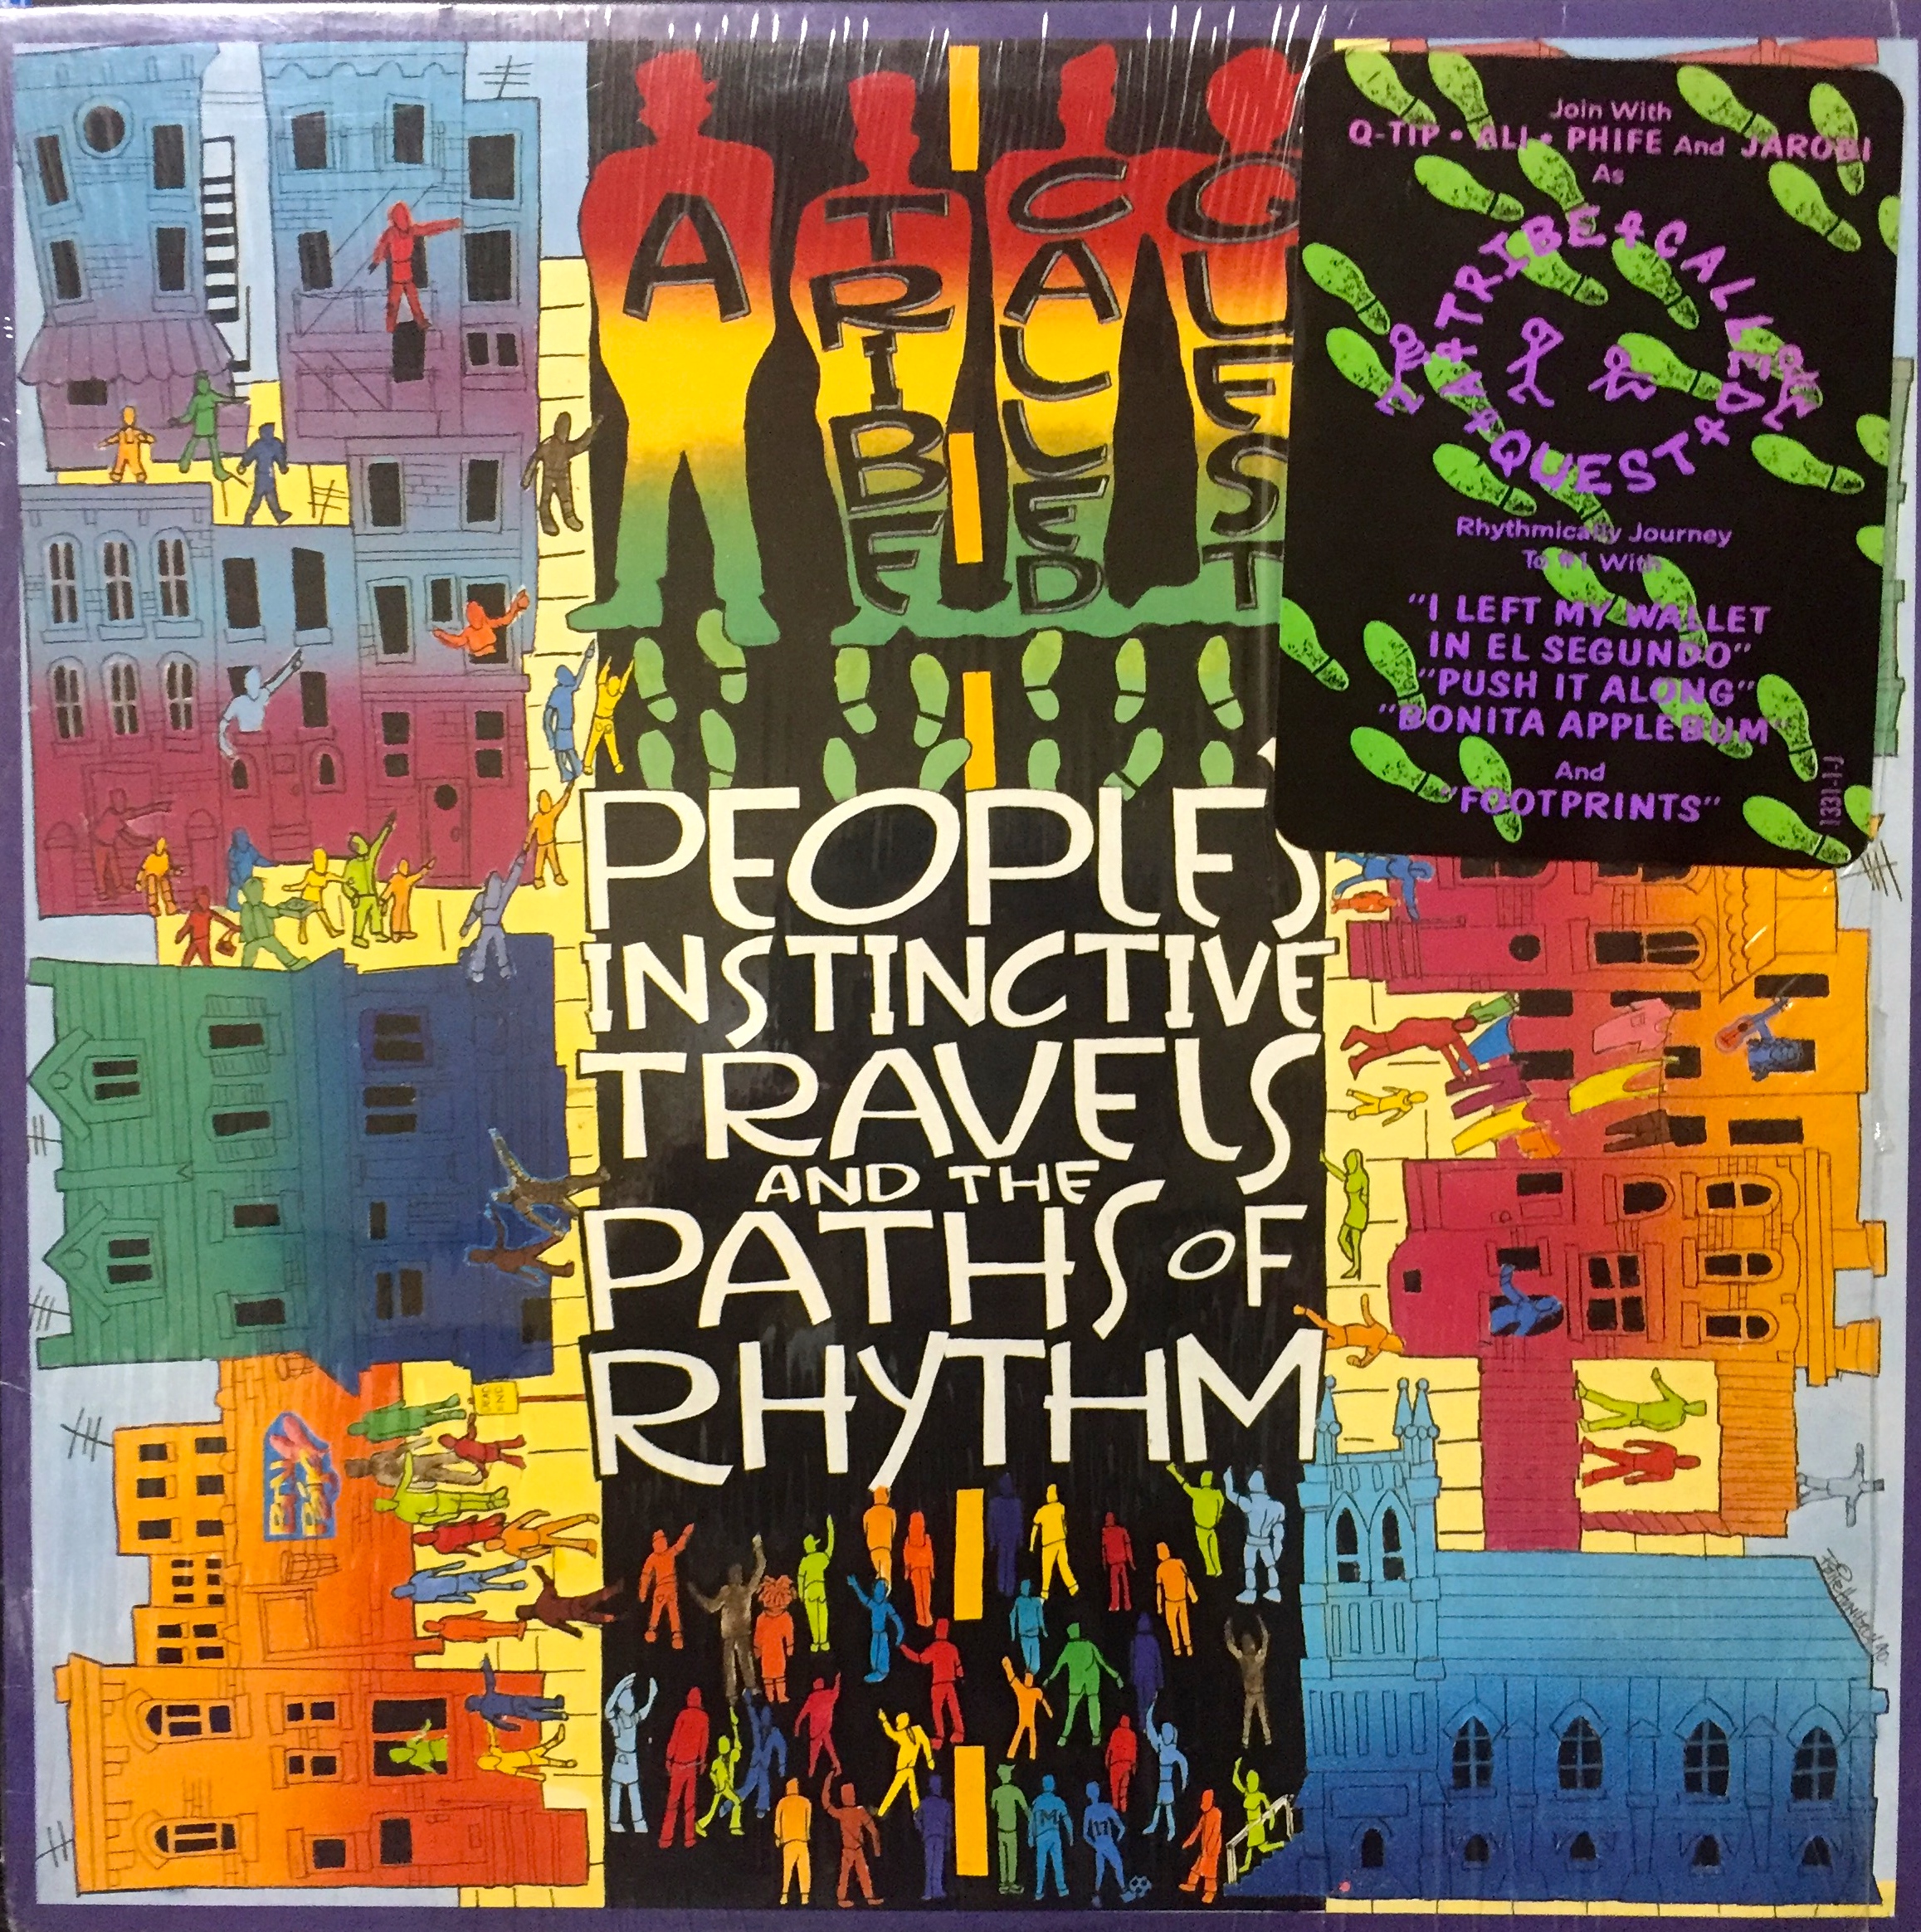 A TRIBE CALLED QUEST/PEOPLE’S INSTINCTIVE TRAVEL & THE PATH OF RHYTHM